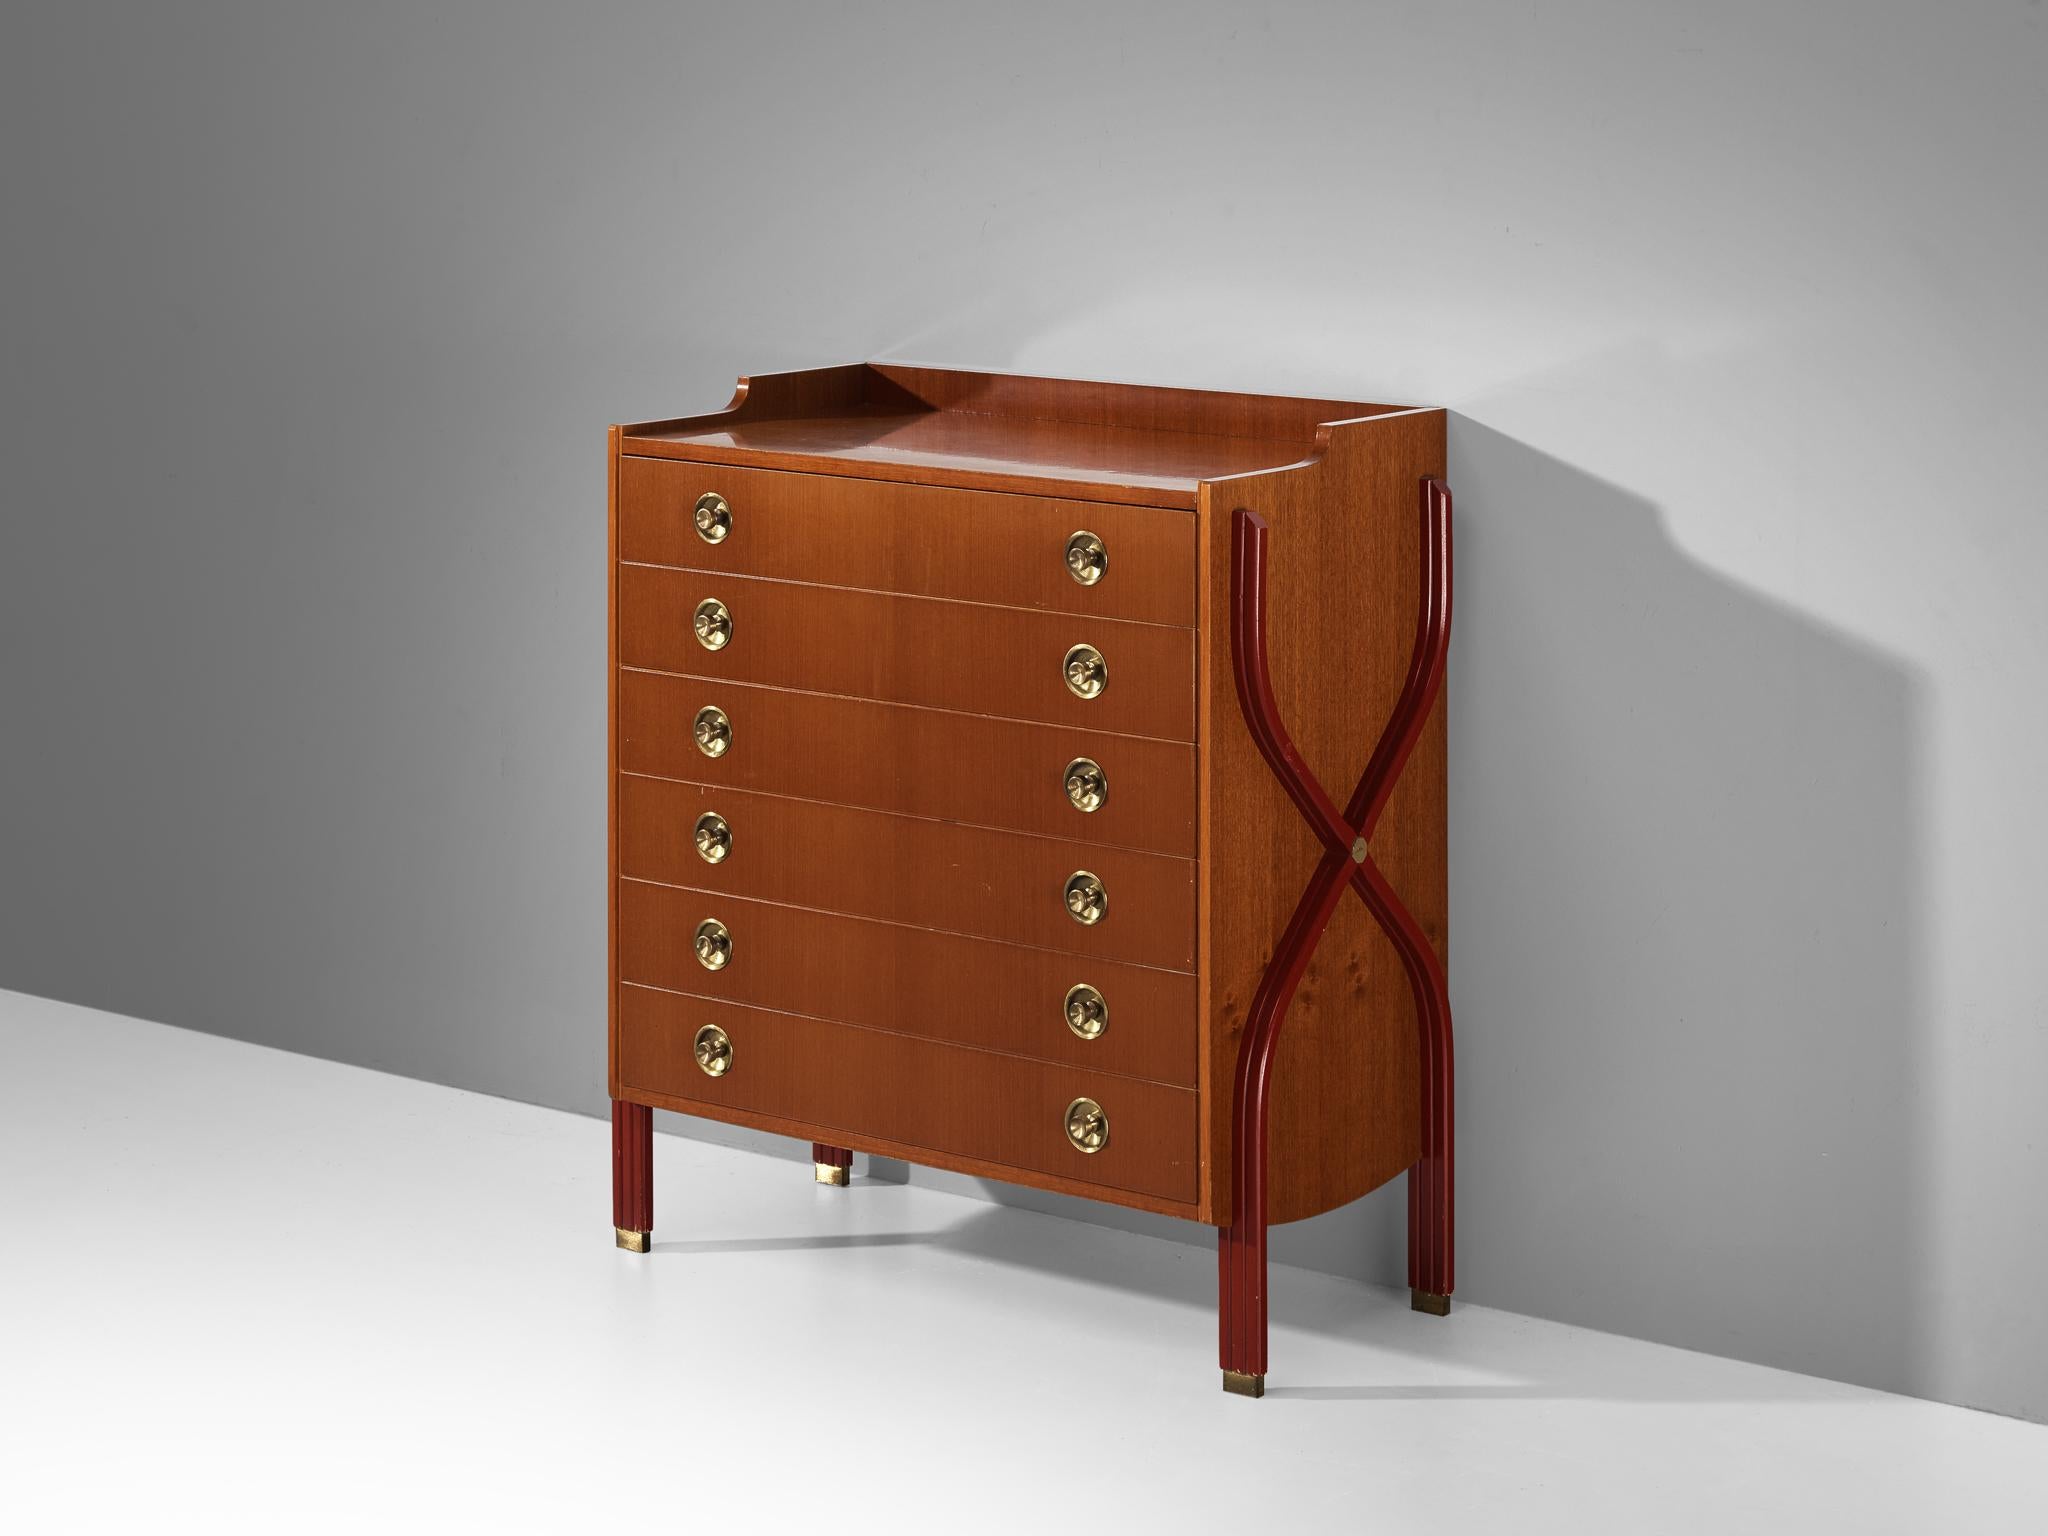 Tosi Arredamenti, chest of drawers, mahogany, brass, lacquered wood, Italy, 1960s

This exquisite chest of drawers, crafted by Tosi Arredamenti, promises to imbue one's bedroom with an air of elegance and sophistication. The cabinet with its